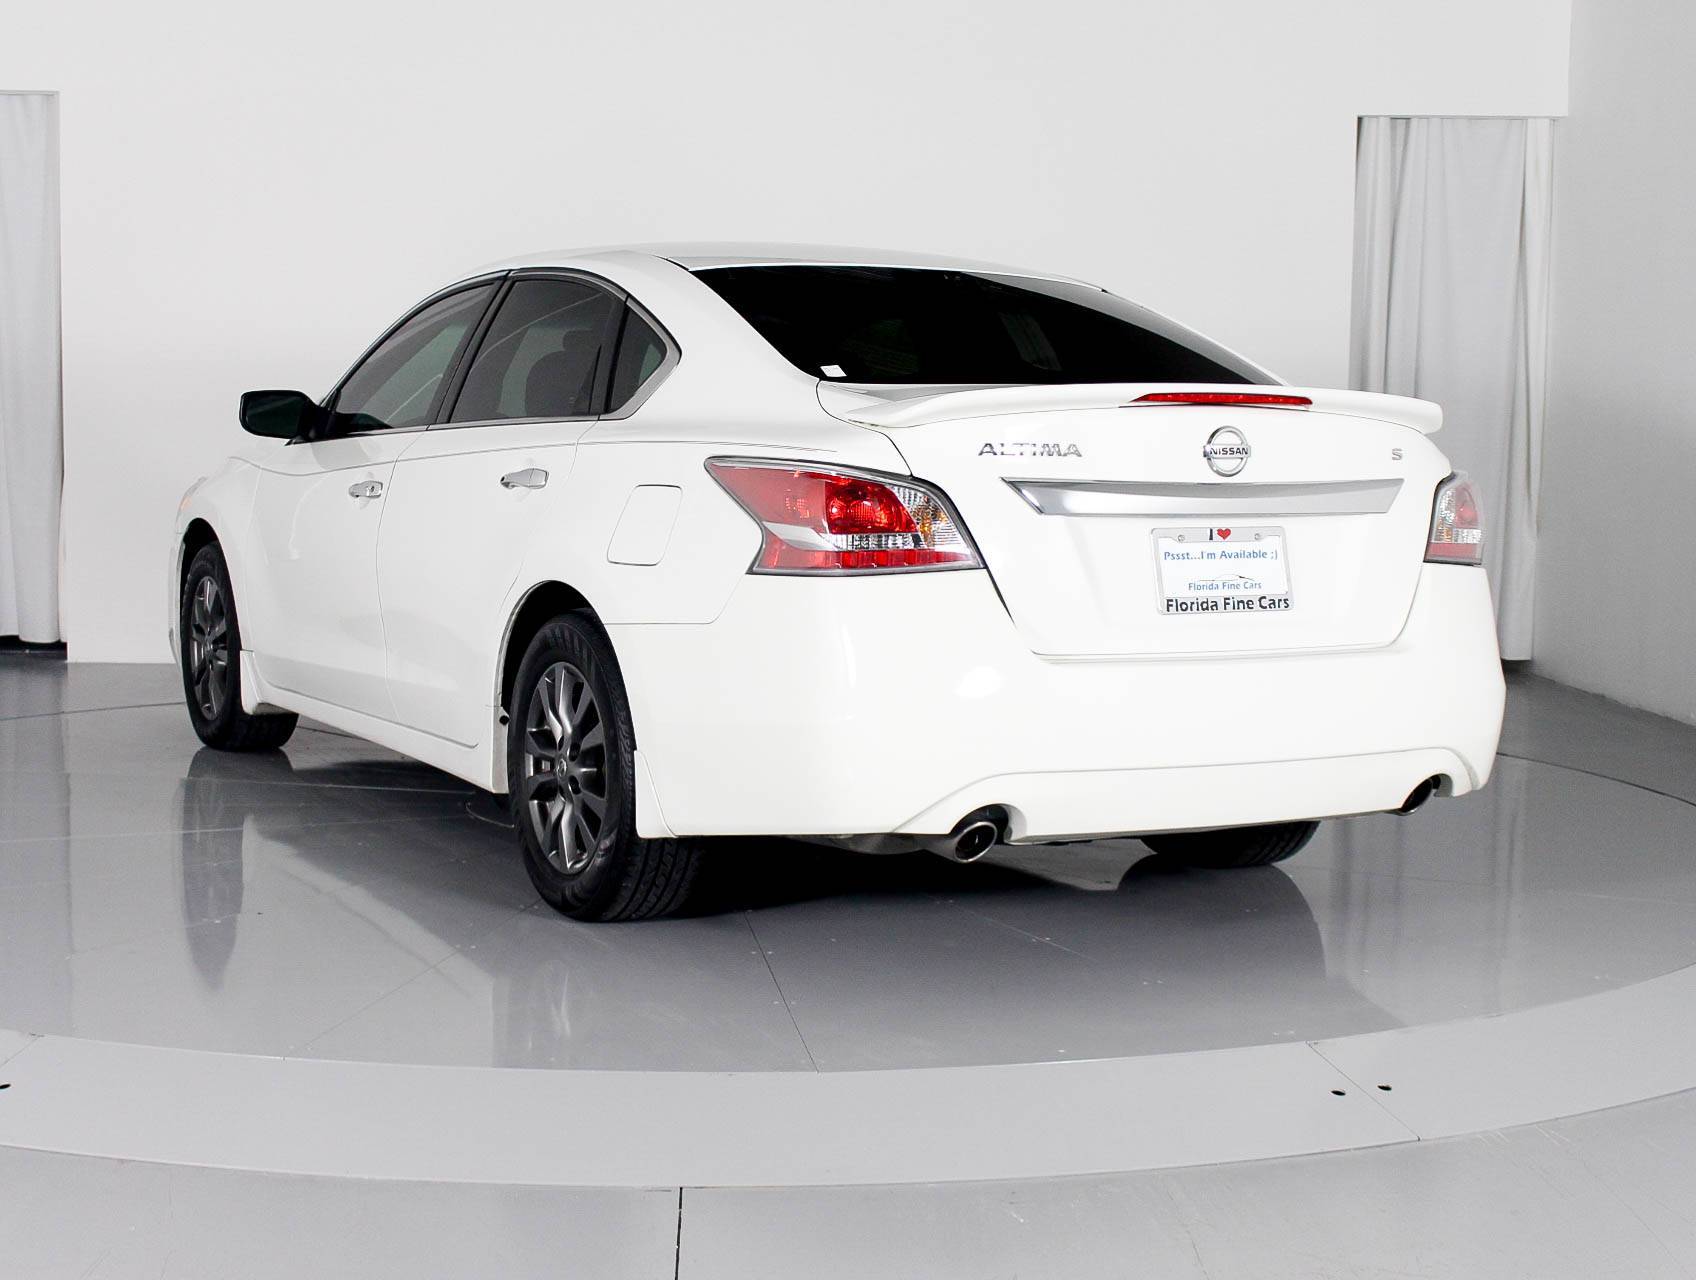 Florida Fine Cars - Used NISSAN ALTIMA 2015 MARGATE S Sport Package